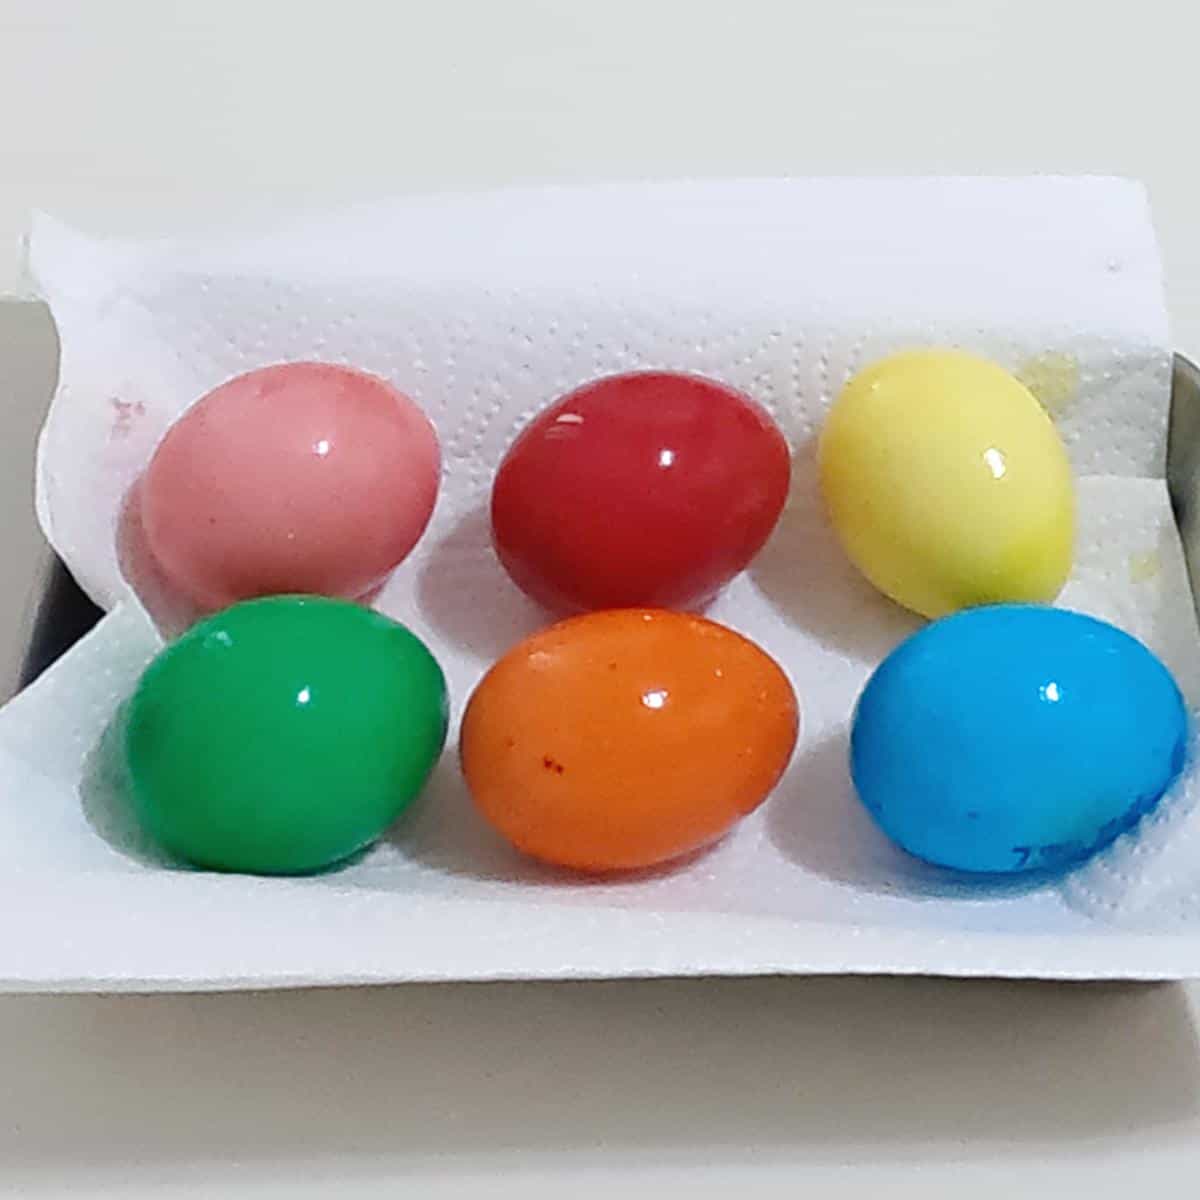 Dyed Eggs on a tray.